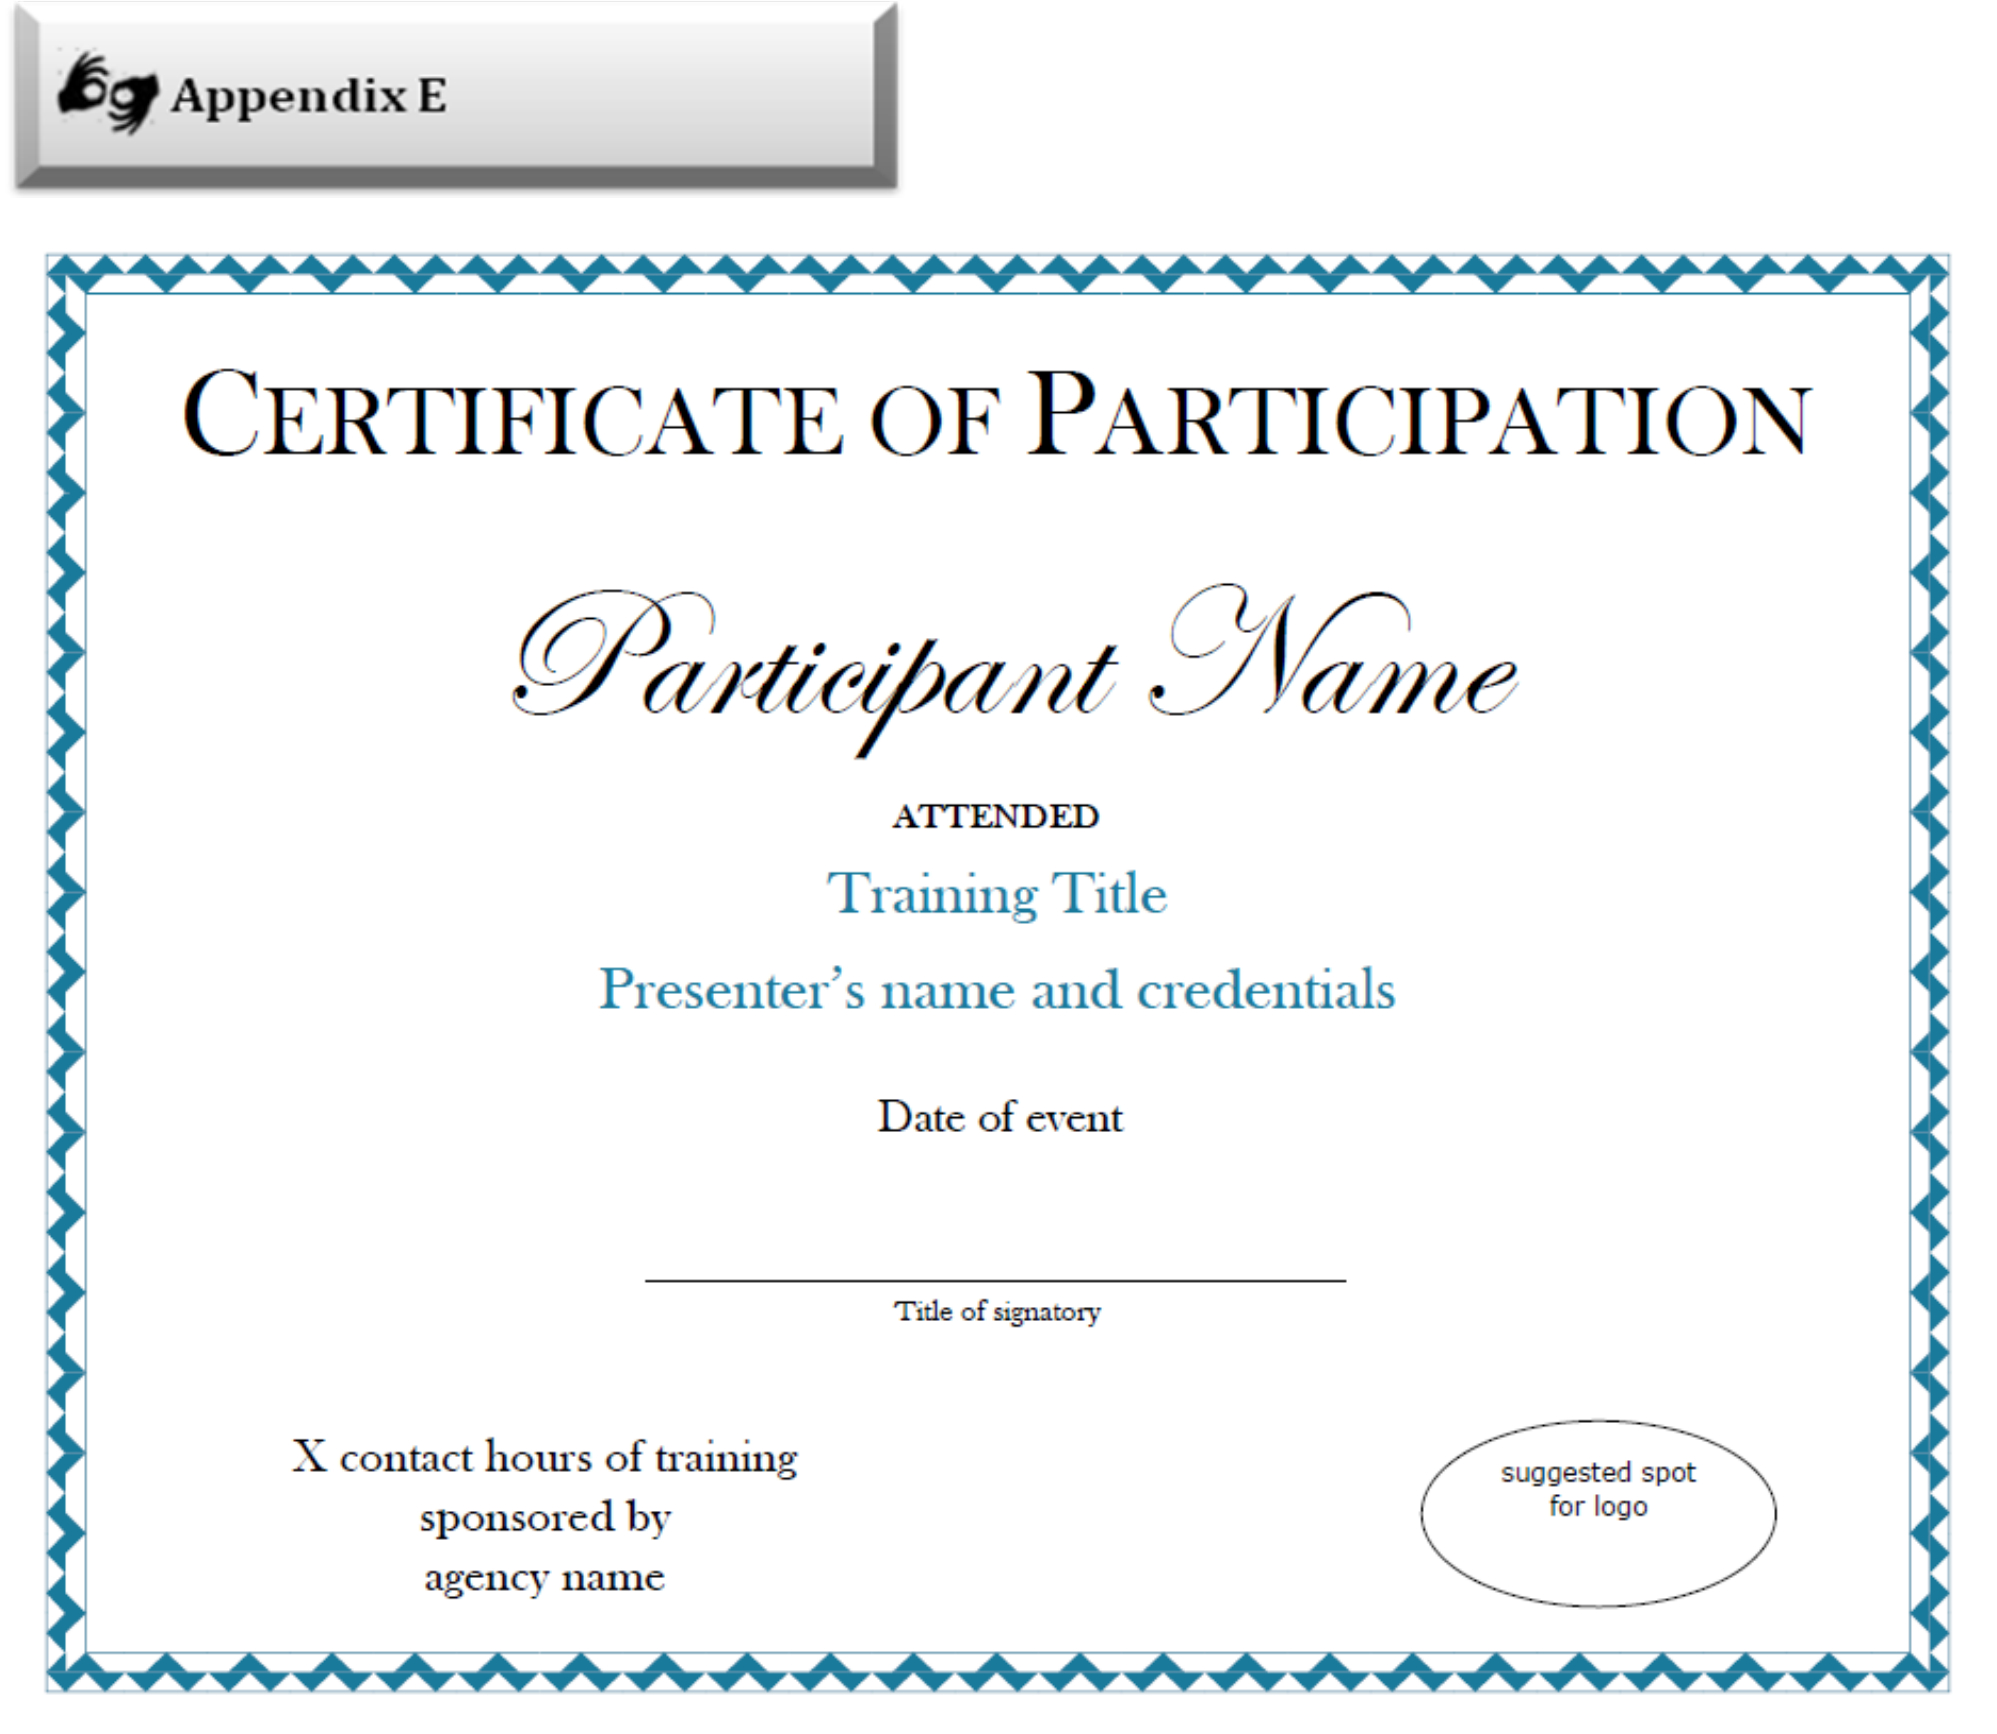 Certificate Of Participation Sample Free Download Inside Certificate Of Participation In Workshop Template